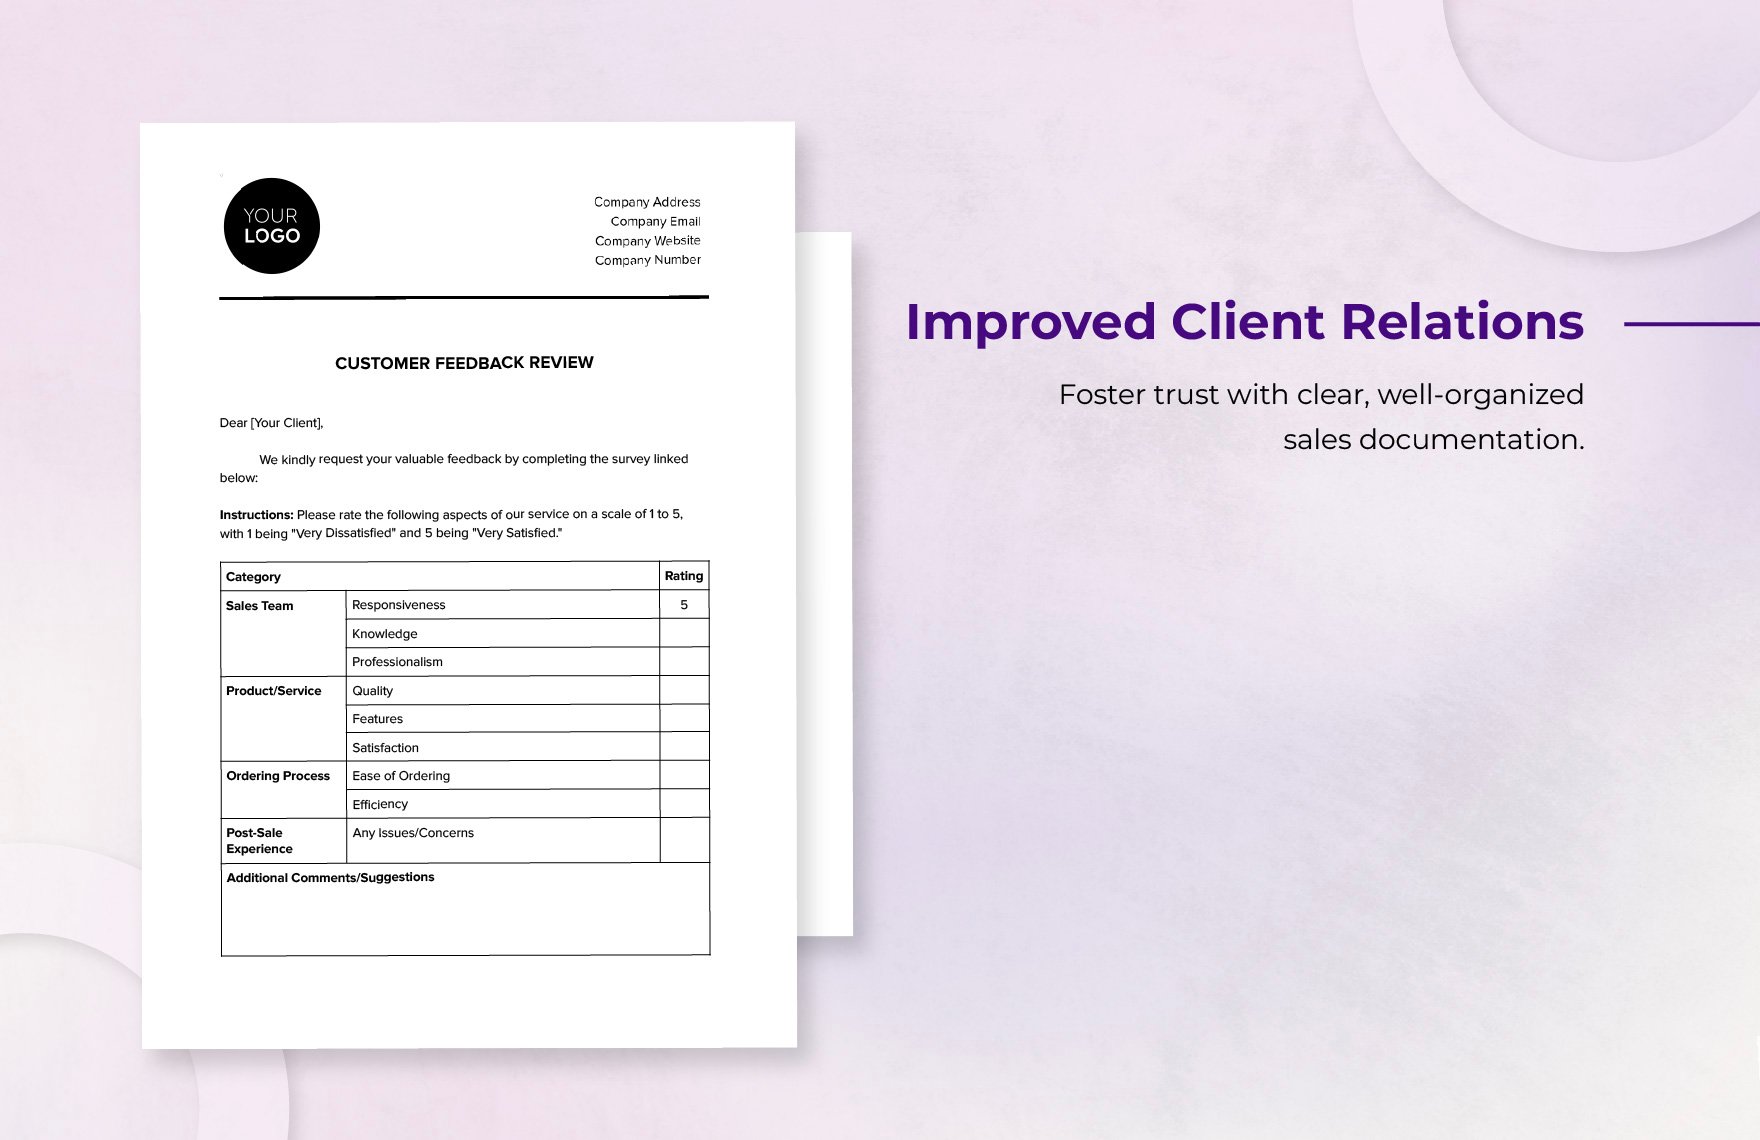 Customer Feedback Review Template